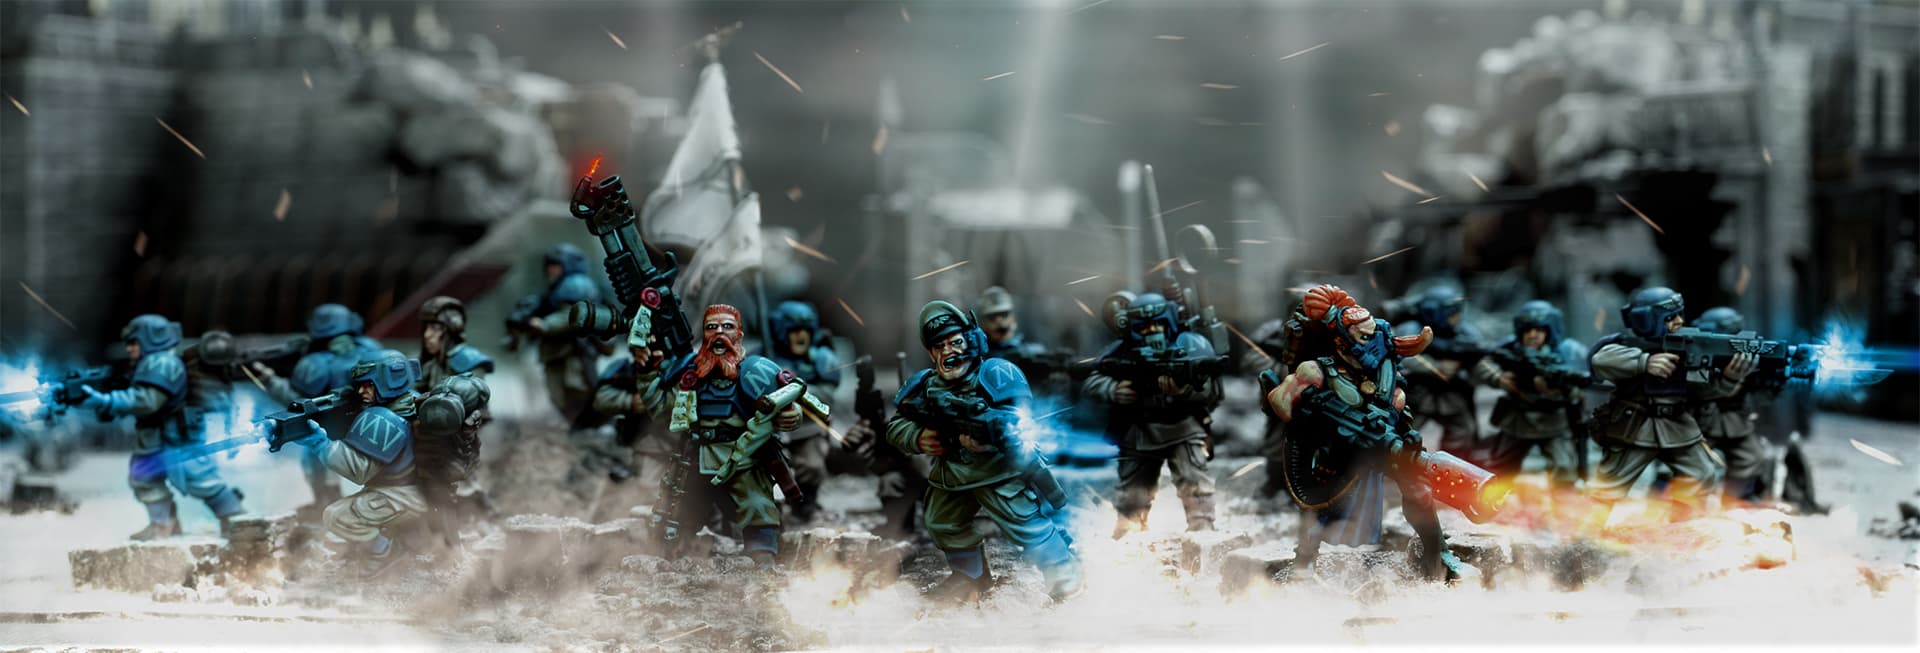 Imperial Guard Conscripts: Miniature Painted by Bryan Cook. © Games Workshop Limited 2007